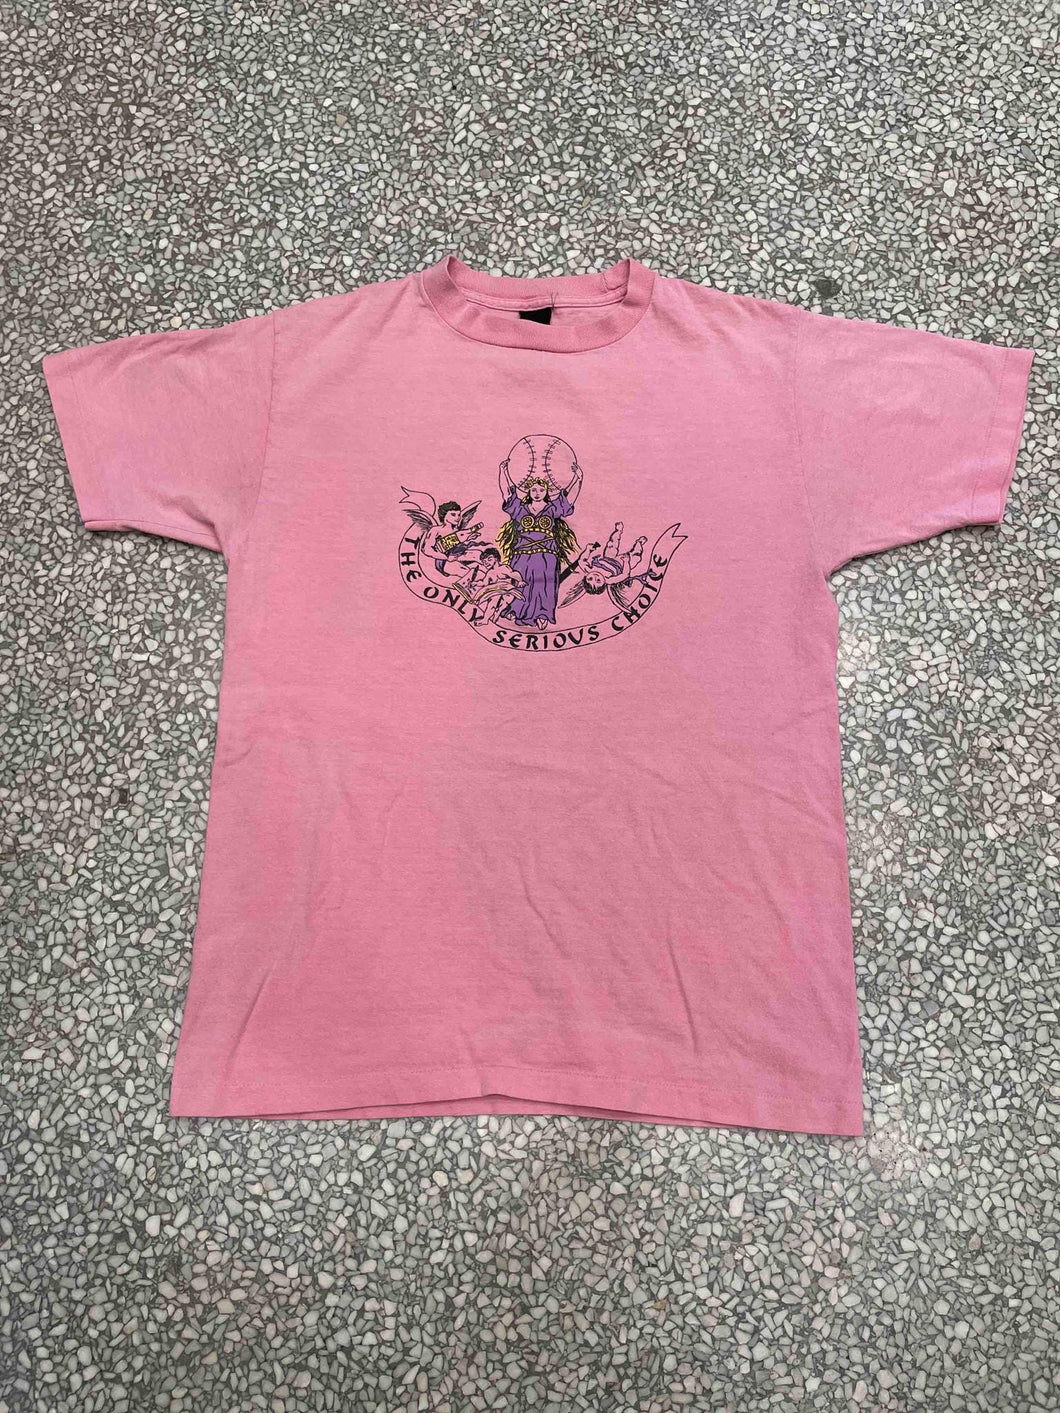 The Only Serious Choice Baseball Angels Vintage 90s Pink ABC Vintage 